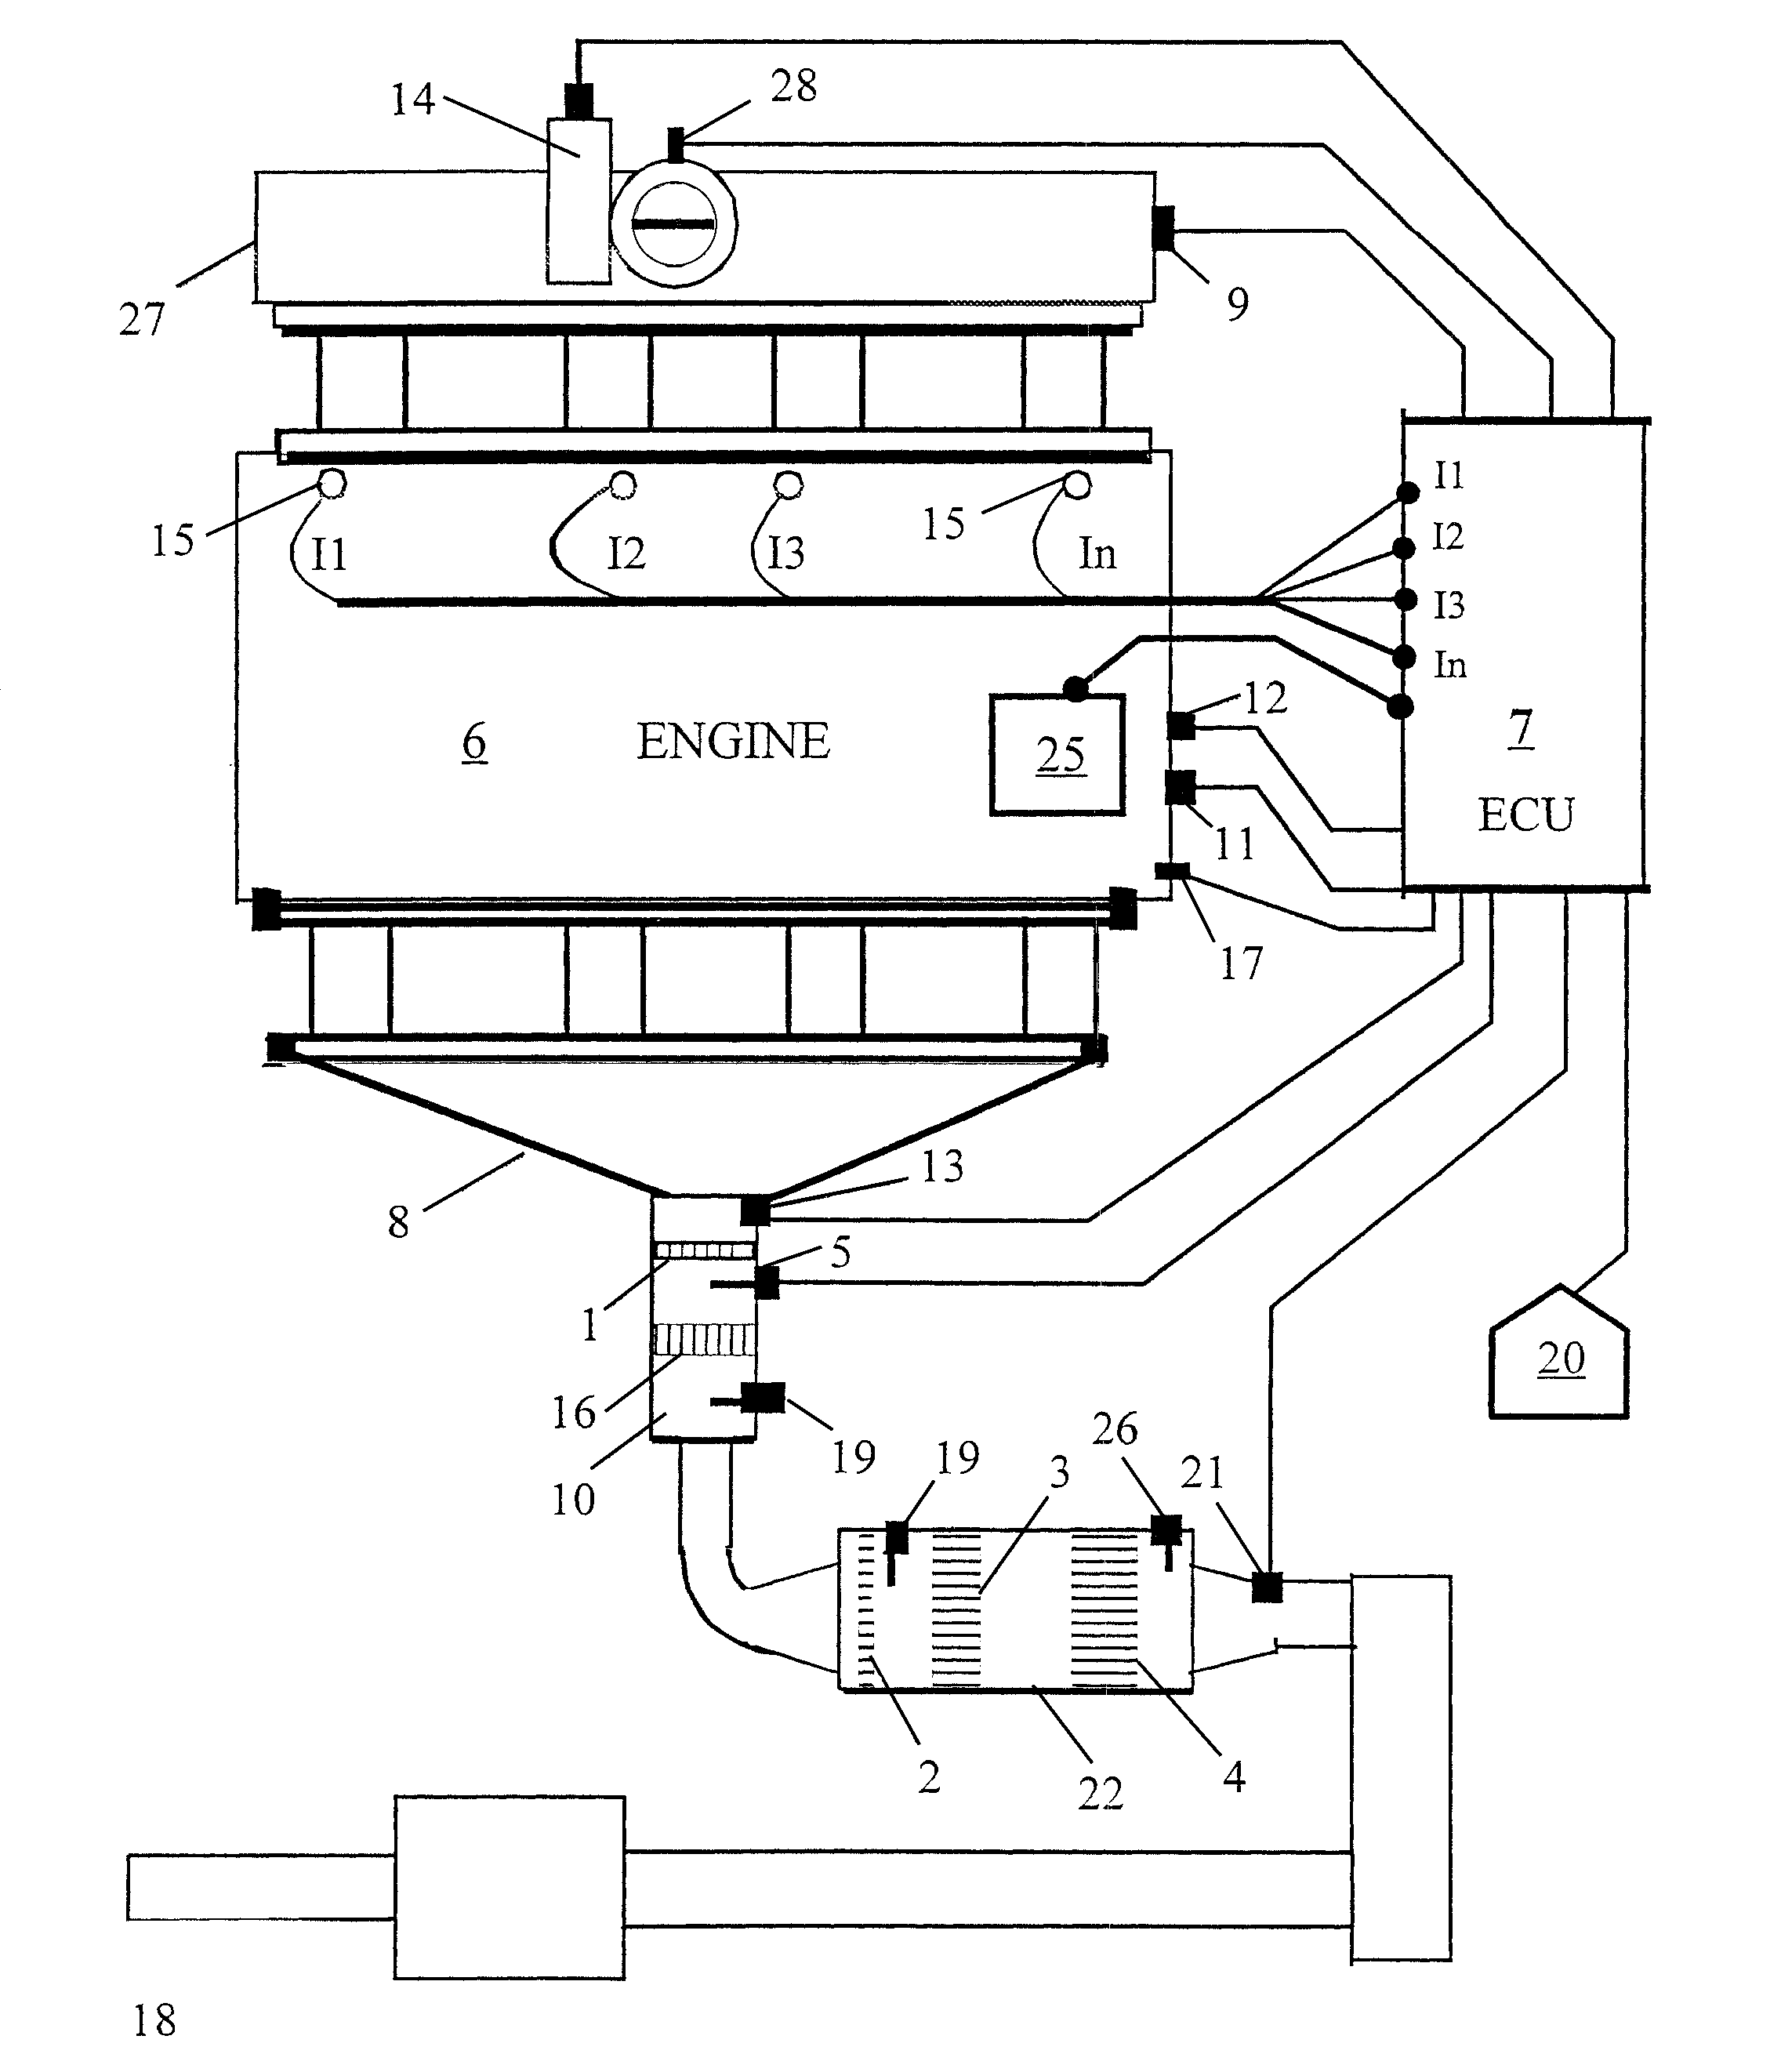 Control methods for improved catalytic converter efficiency and diagnosis